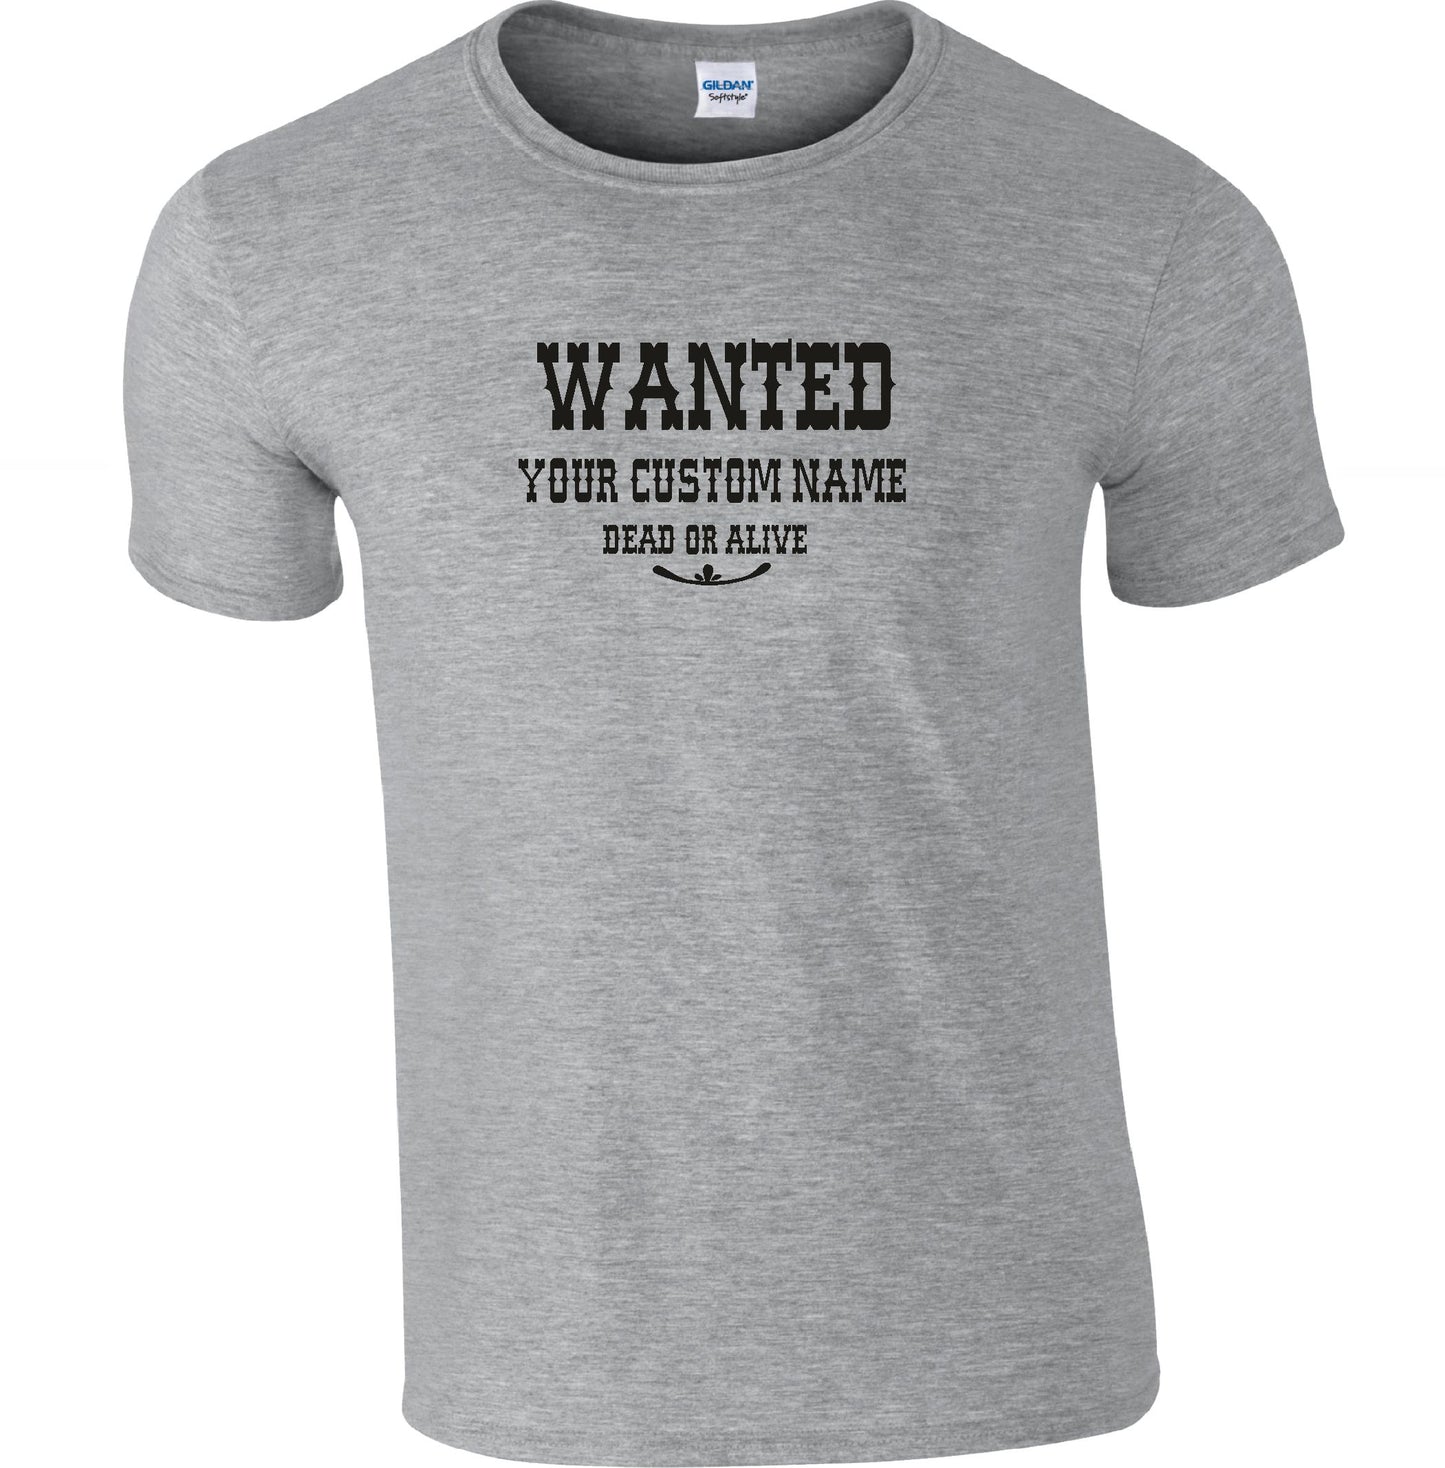 Personalised Custom Printed 'Wanted Poster' T-Shirt - Cowboy, Western, S-XXL